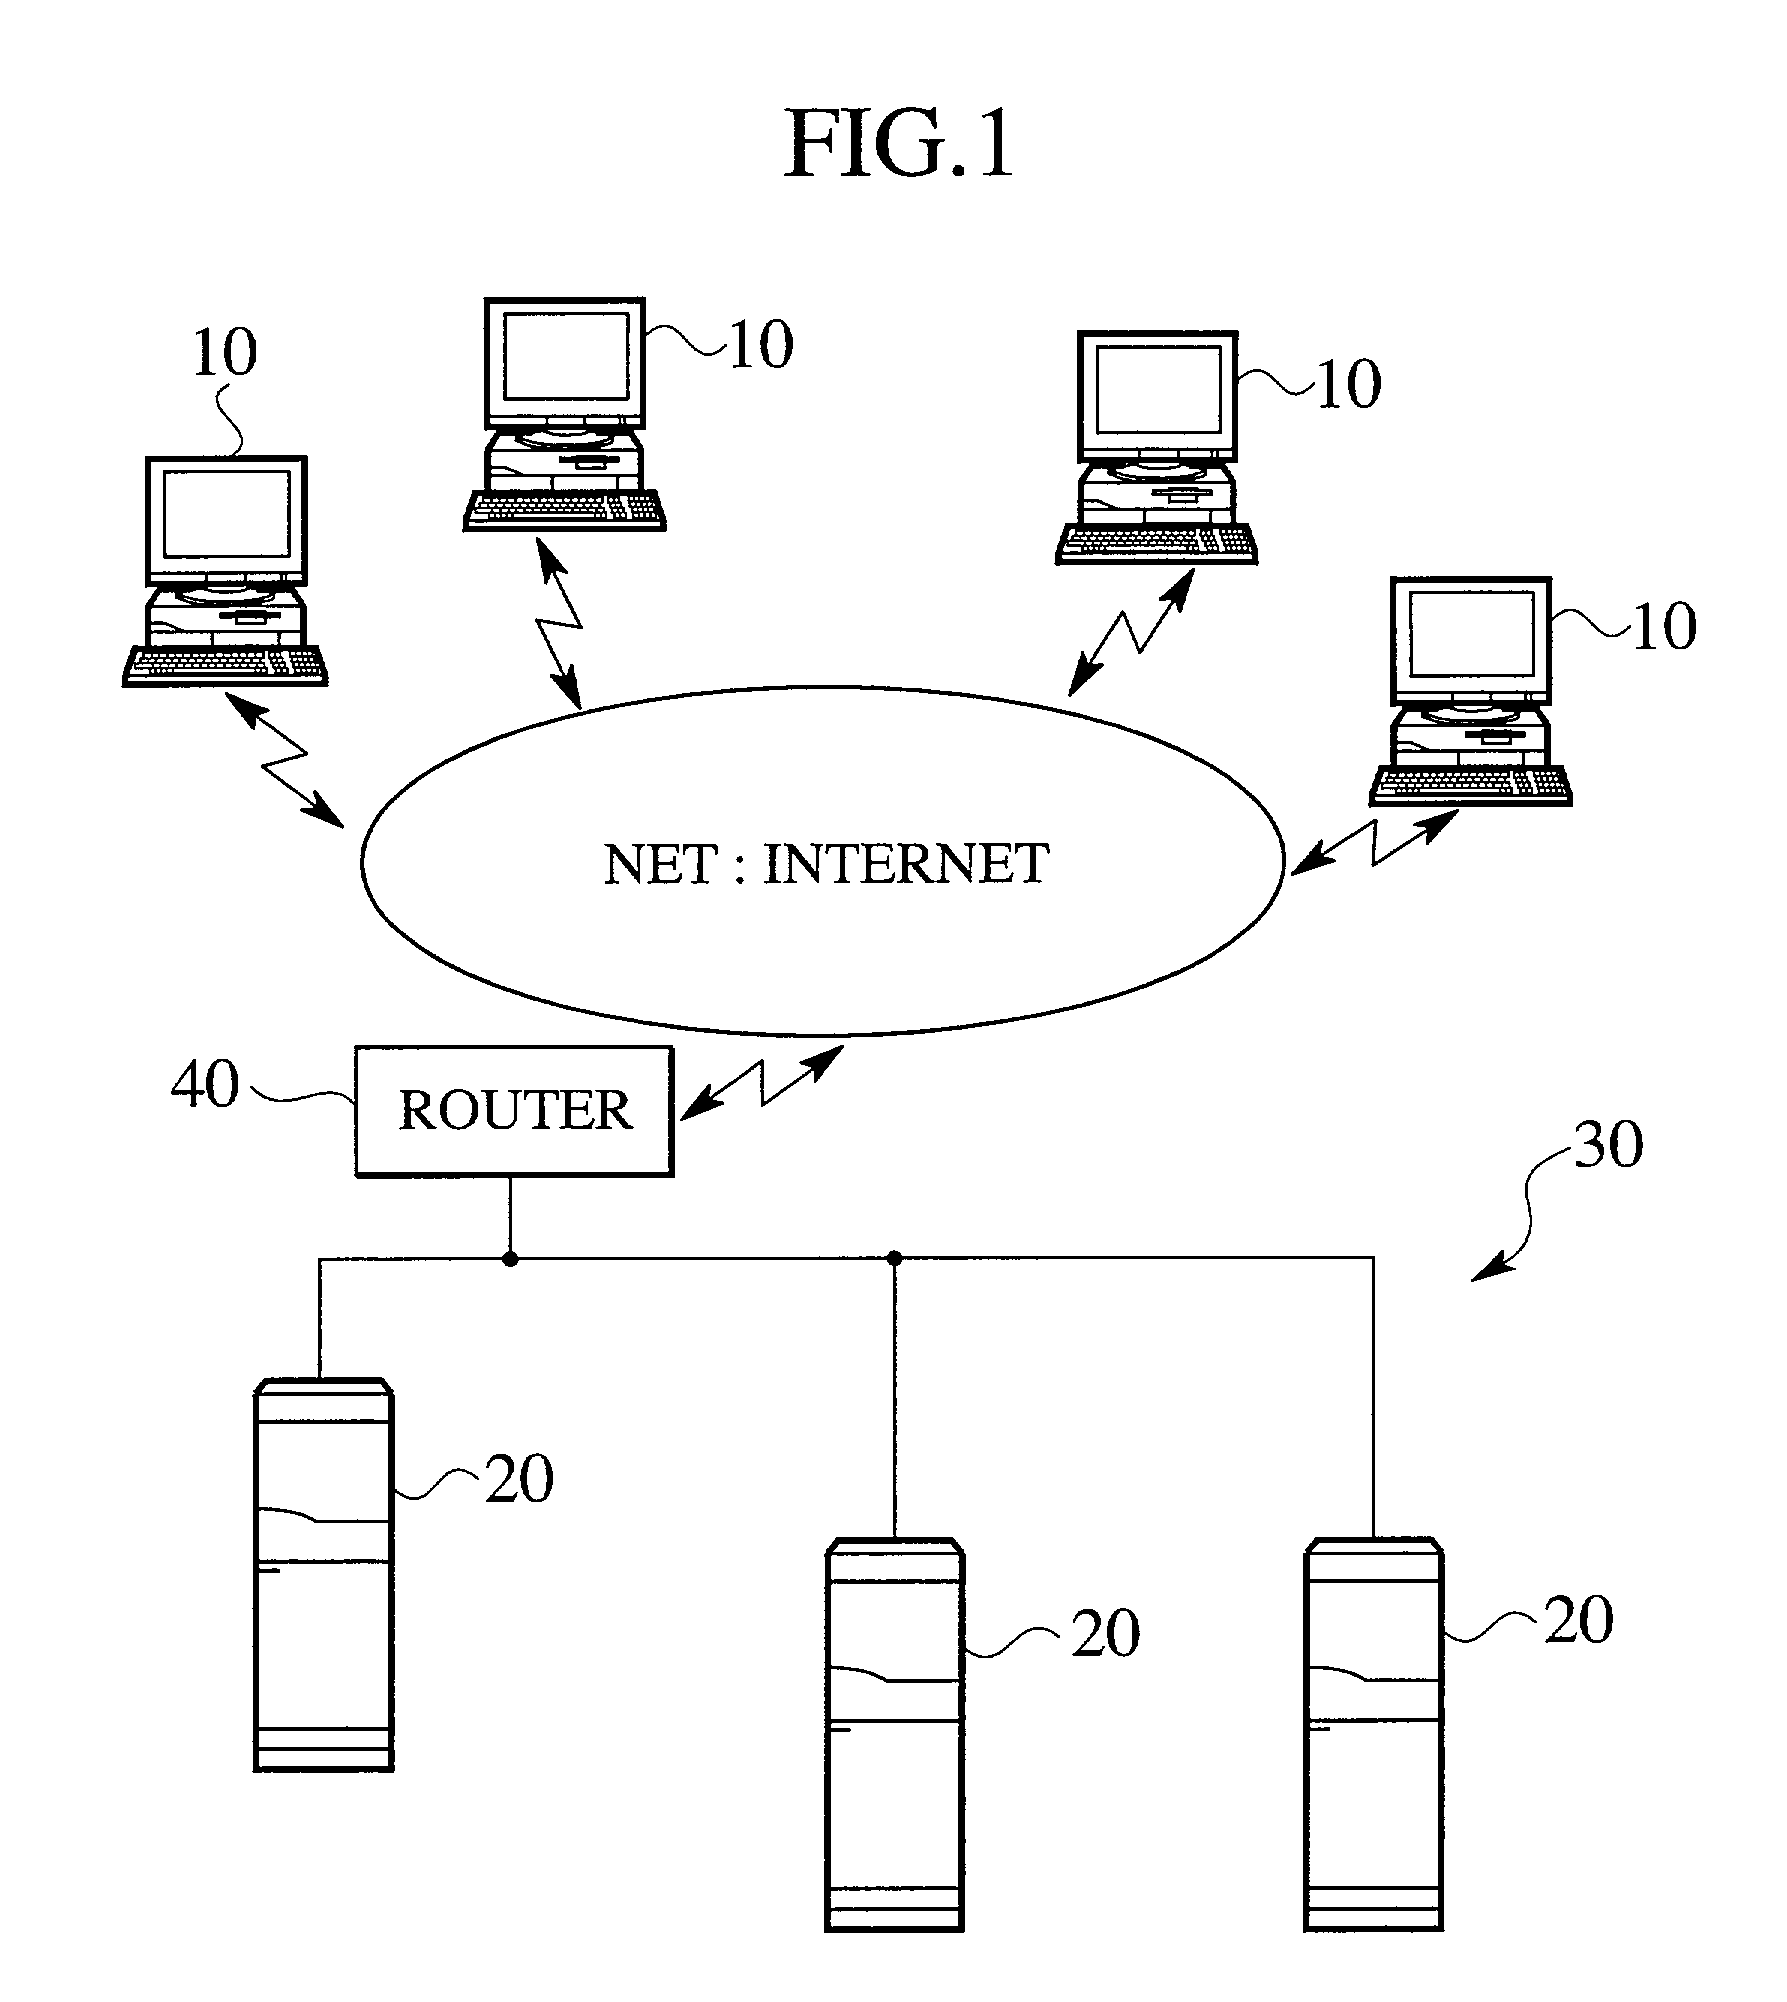 Multi-dimensional order making and receiving business matching system